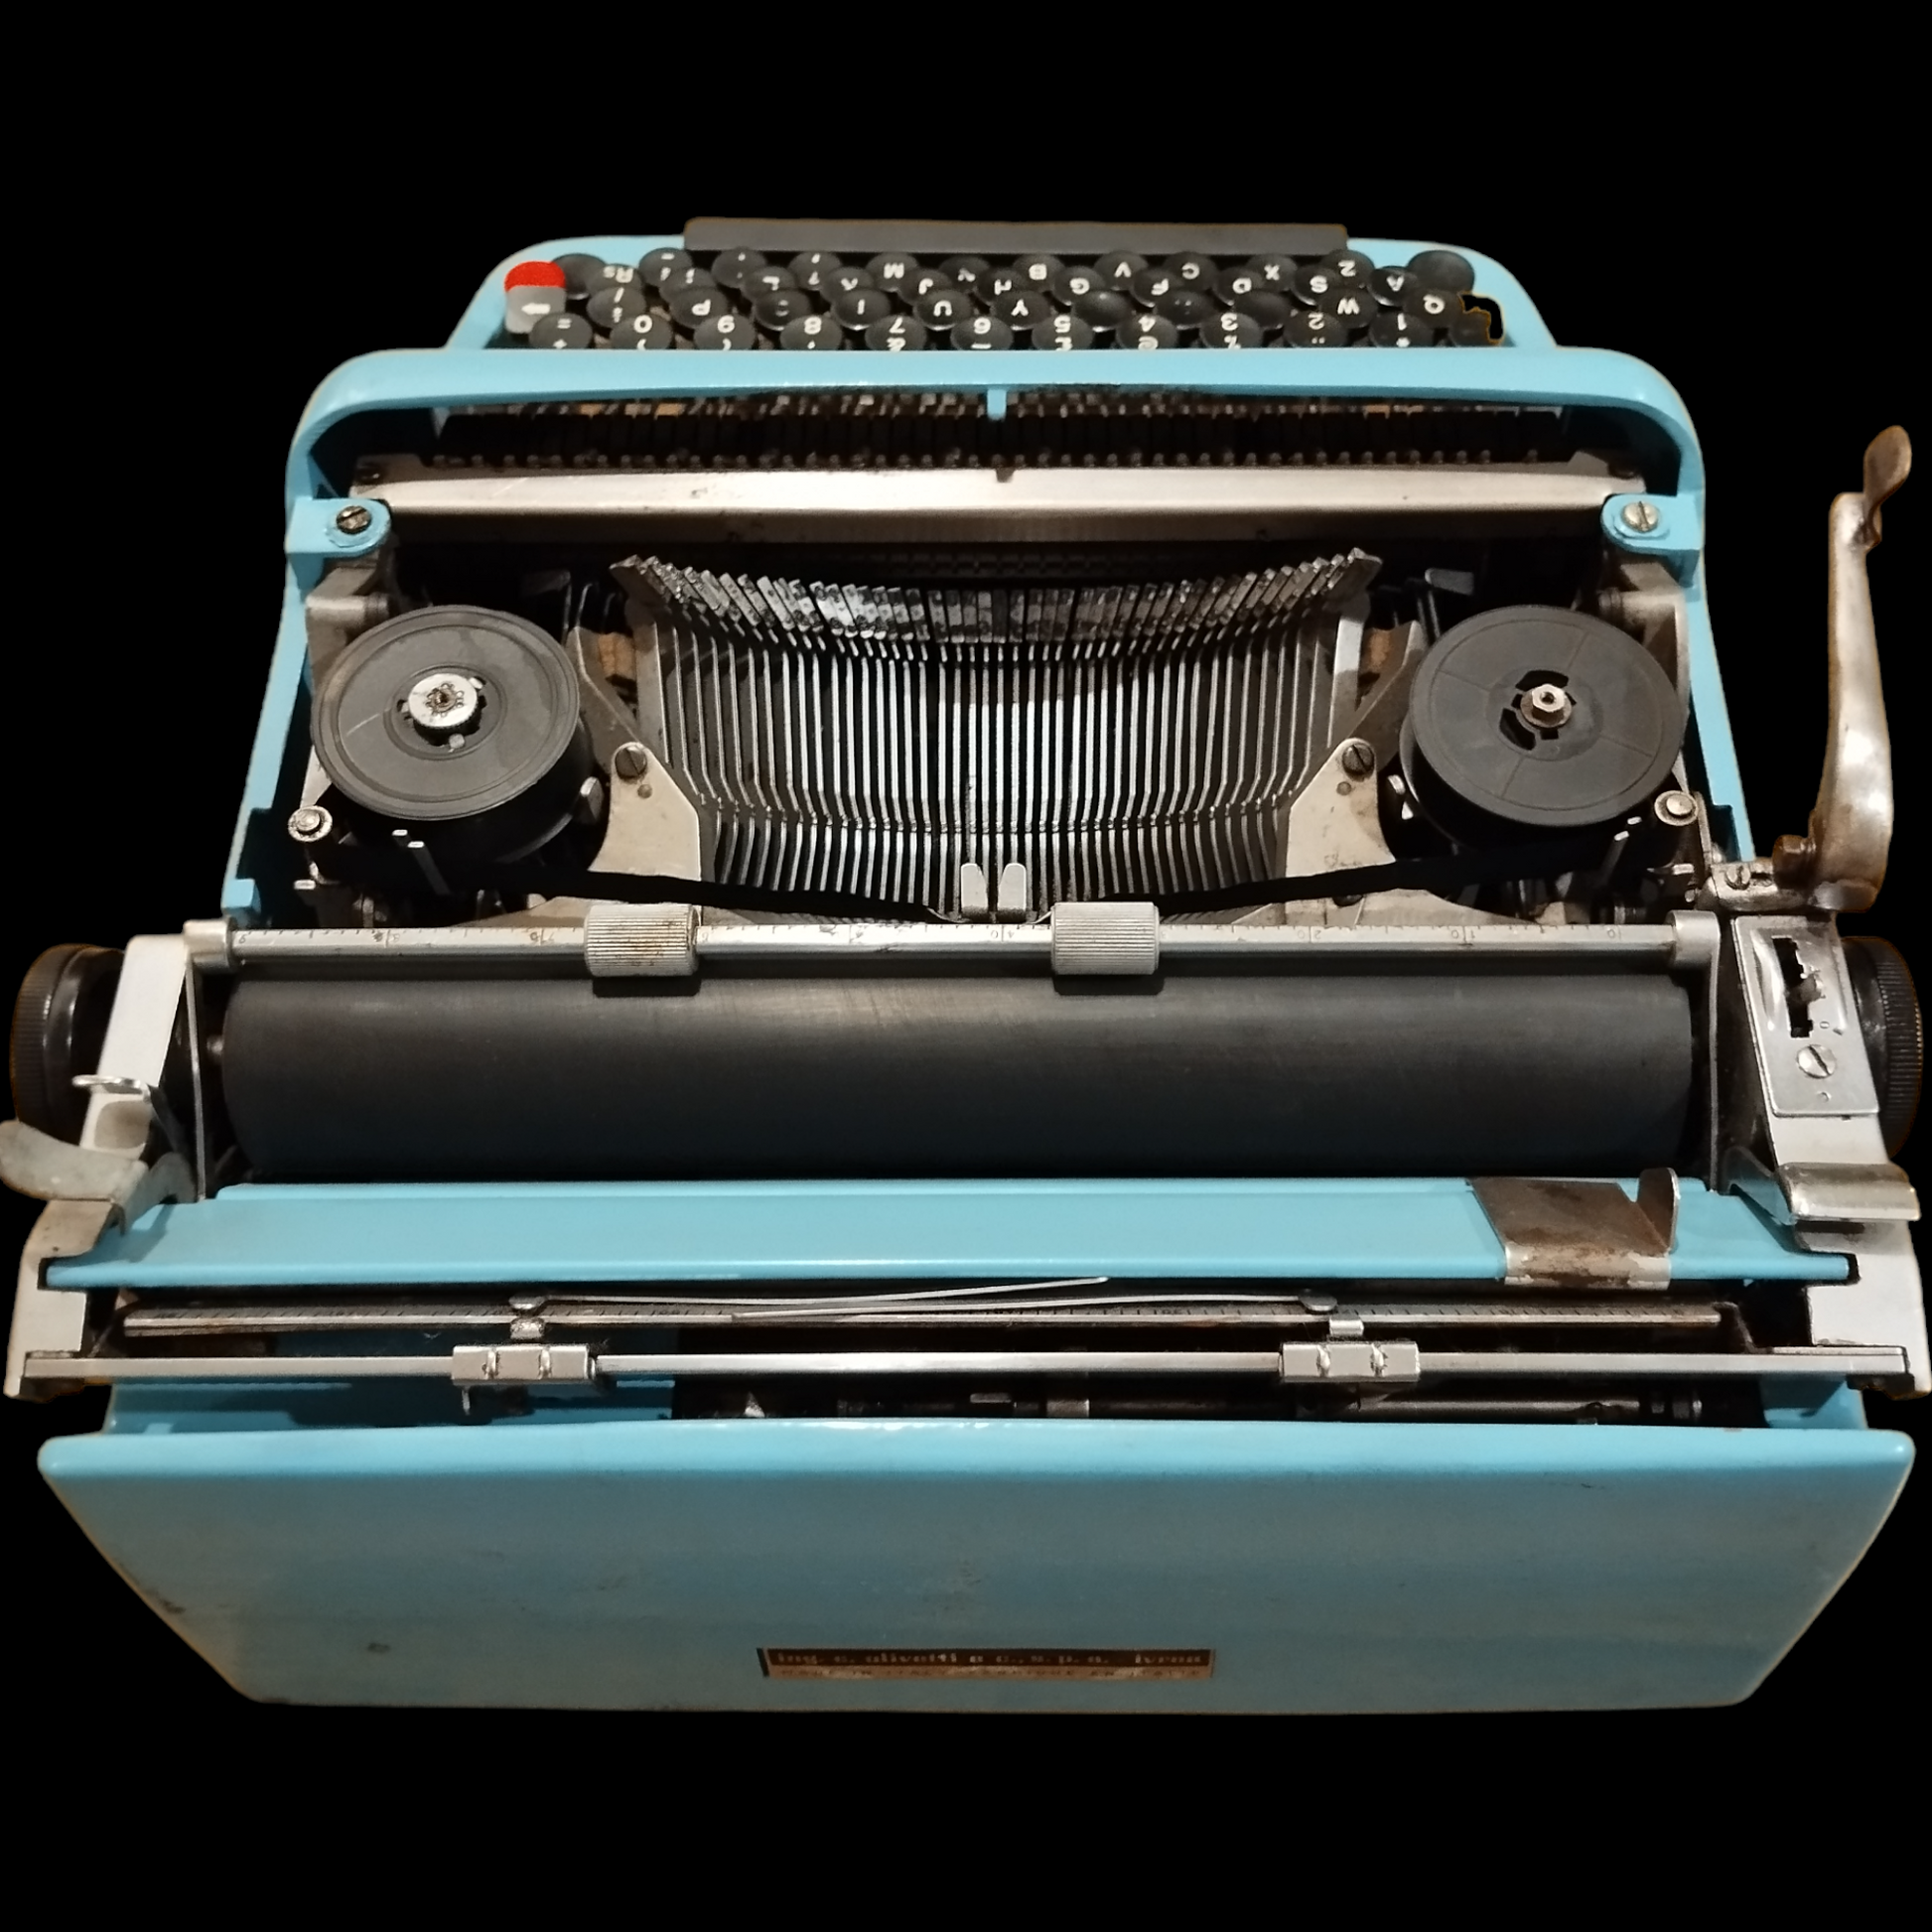 Image of Olivetti Studio Typewriter. Available from universaltypewritercompany.in